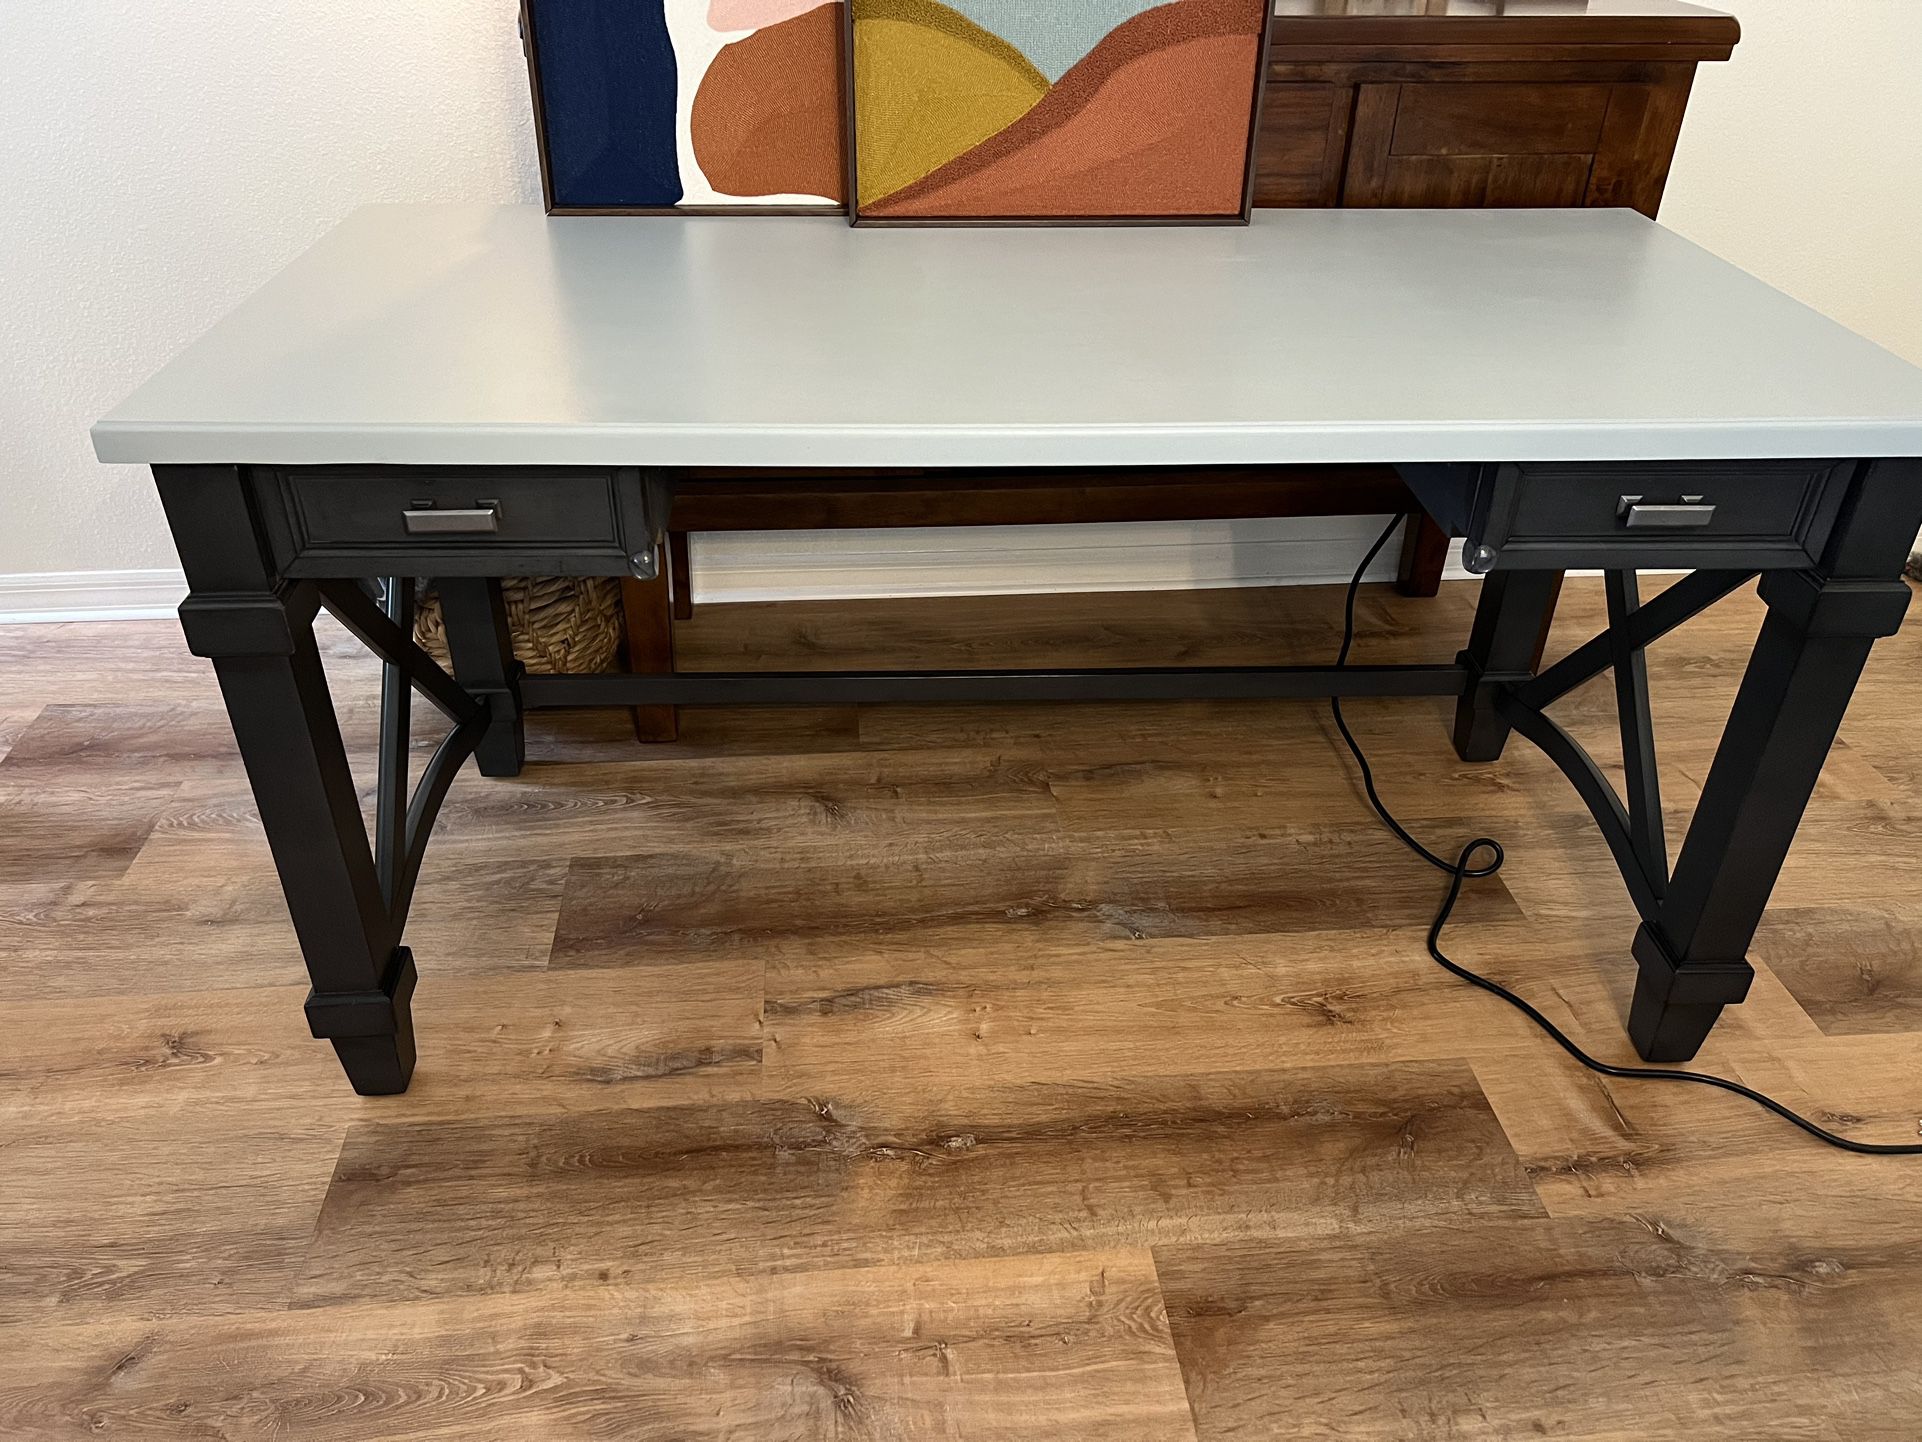 Stylish Solid Wood Desk from Costco